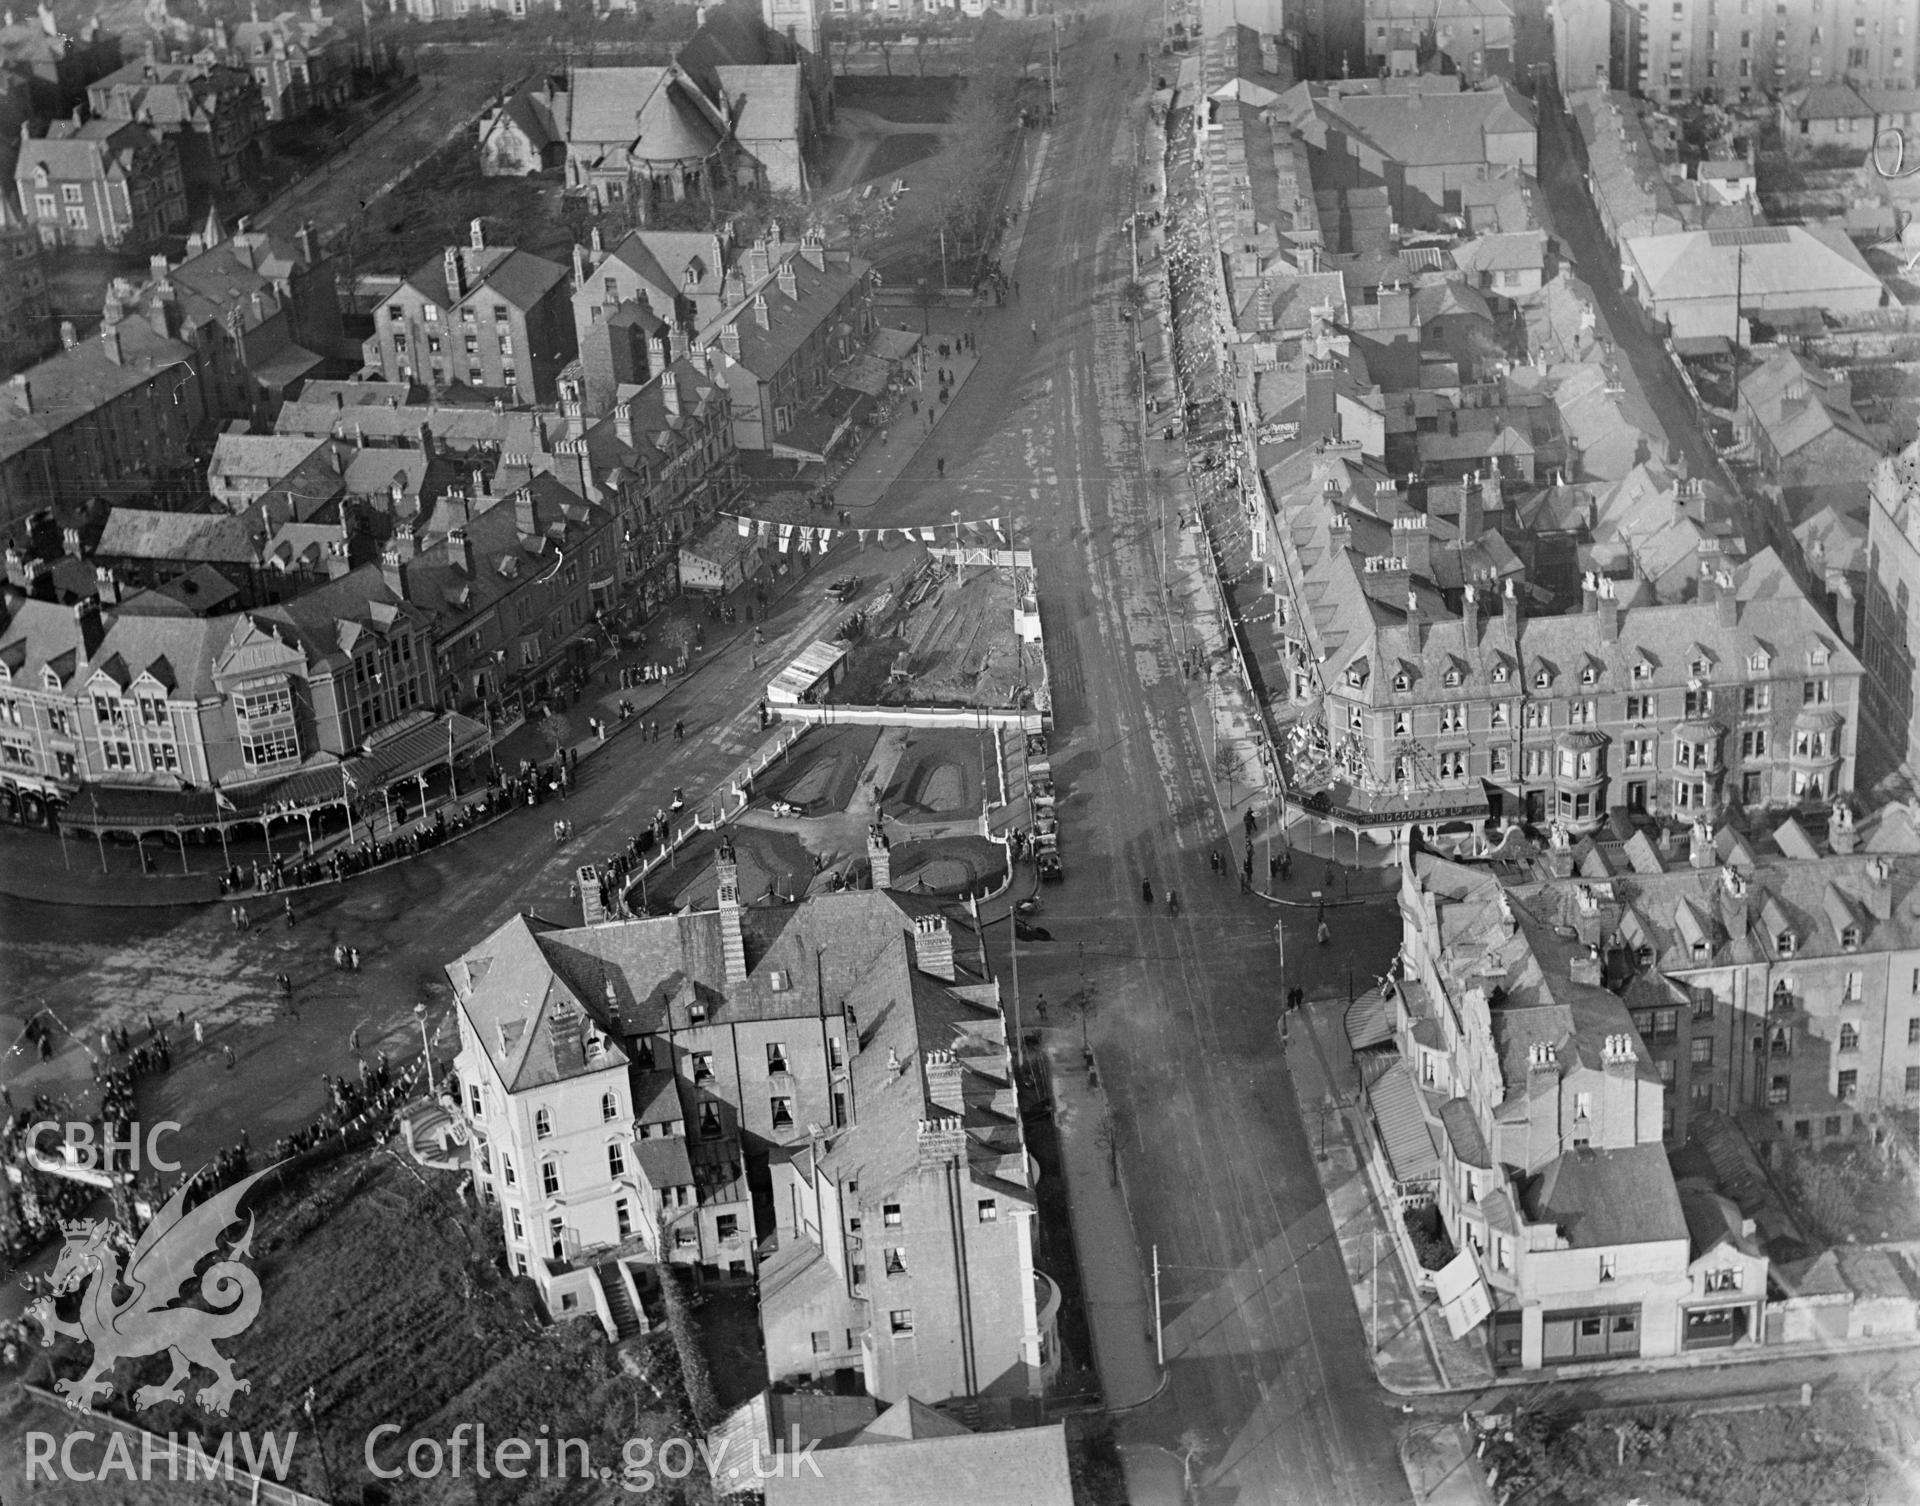 Llandudno streets taken during the visit of the Prince of Wales (later Edward VIII) November 1923, oblique aerial view. 5?x4? black and white glass plate negative.